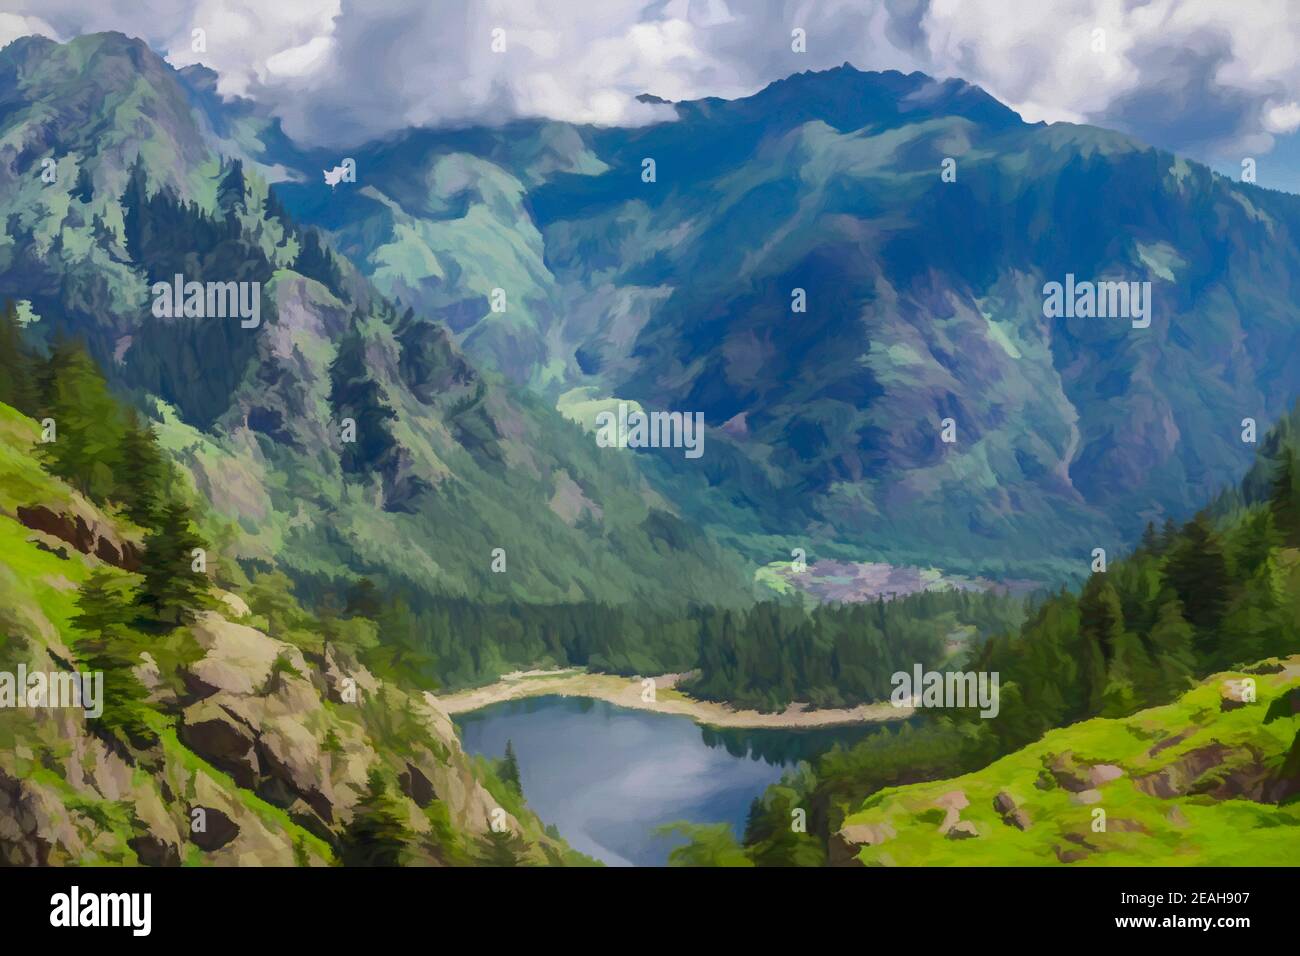 Digital painting of an aerial view of Antrona Lake in Antrona Valley National Park, Piedmont, Italy. Stock Photo